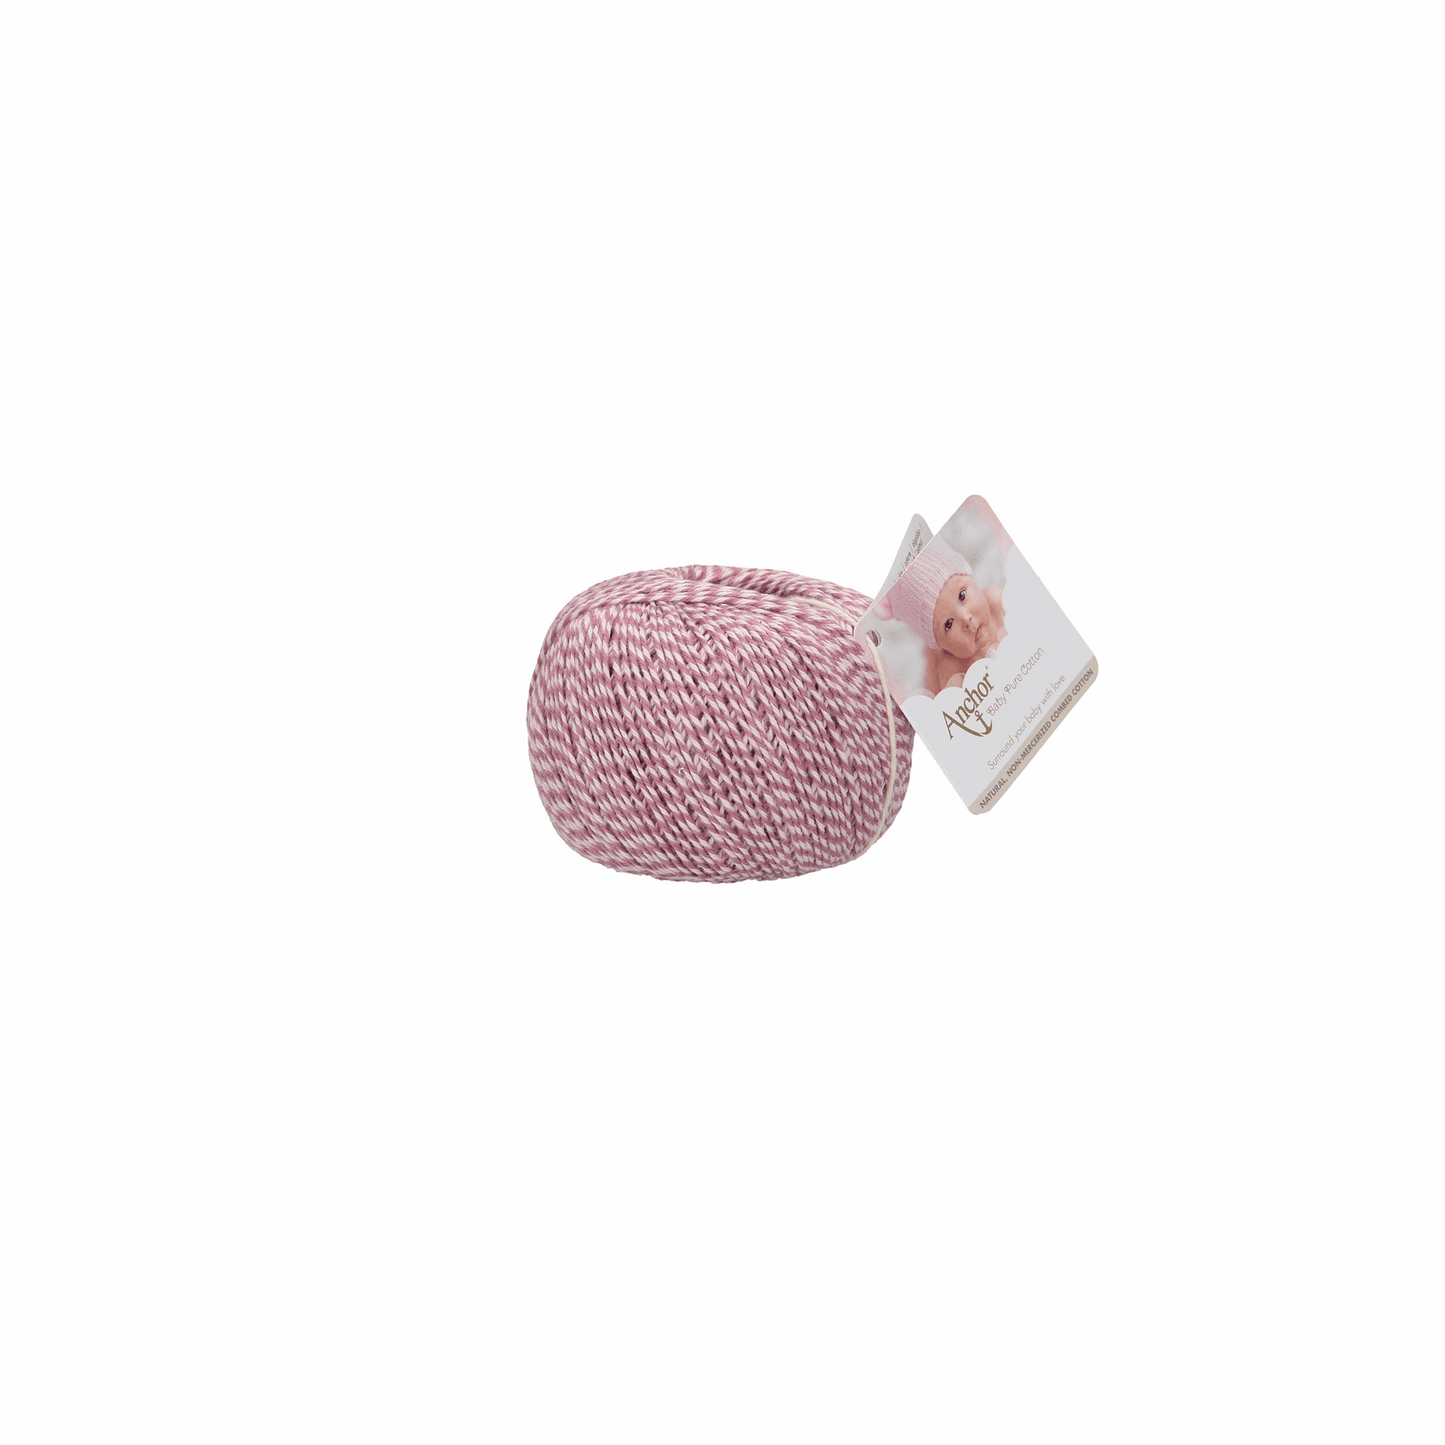 Anchor Baby Pure Cotton, 50g, Farbe 503 spotty pink